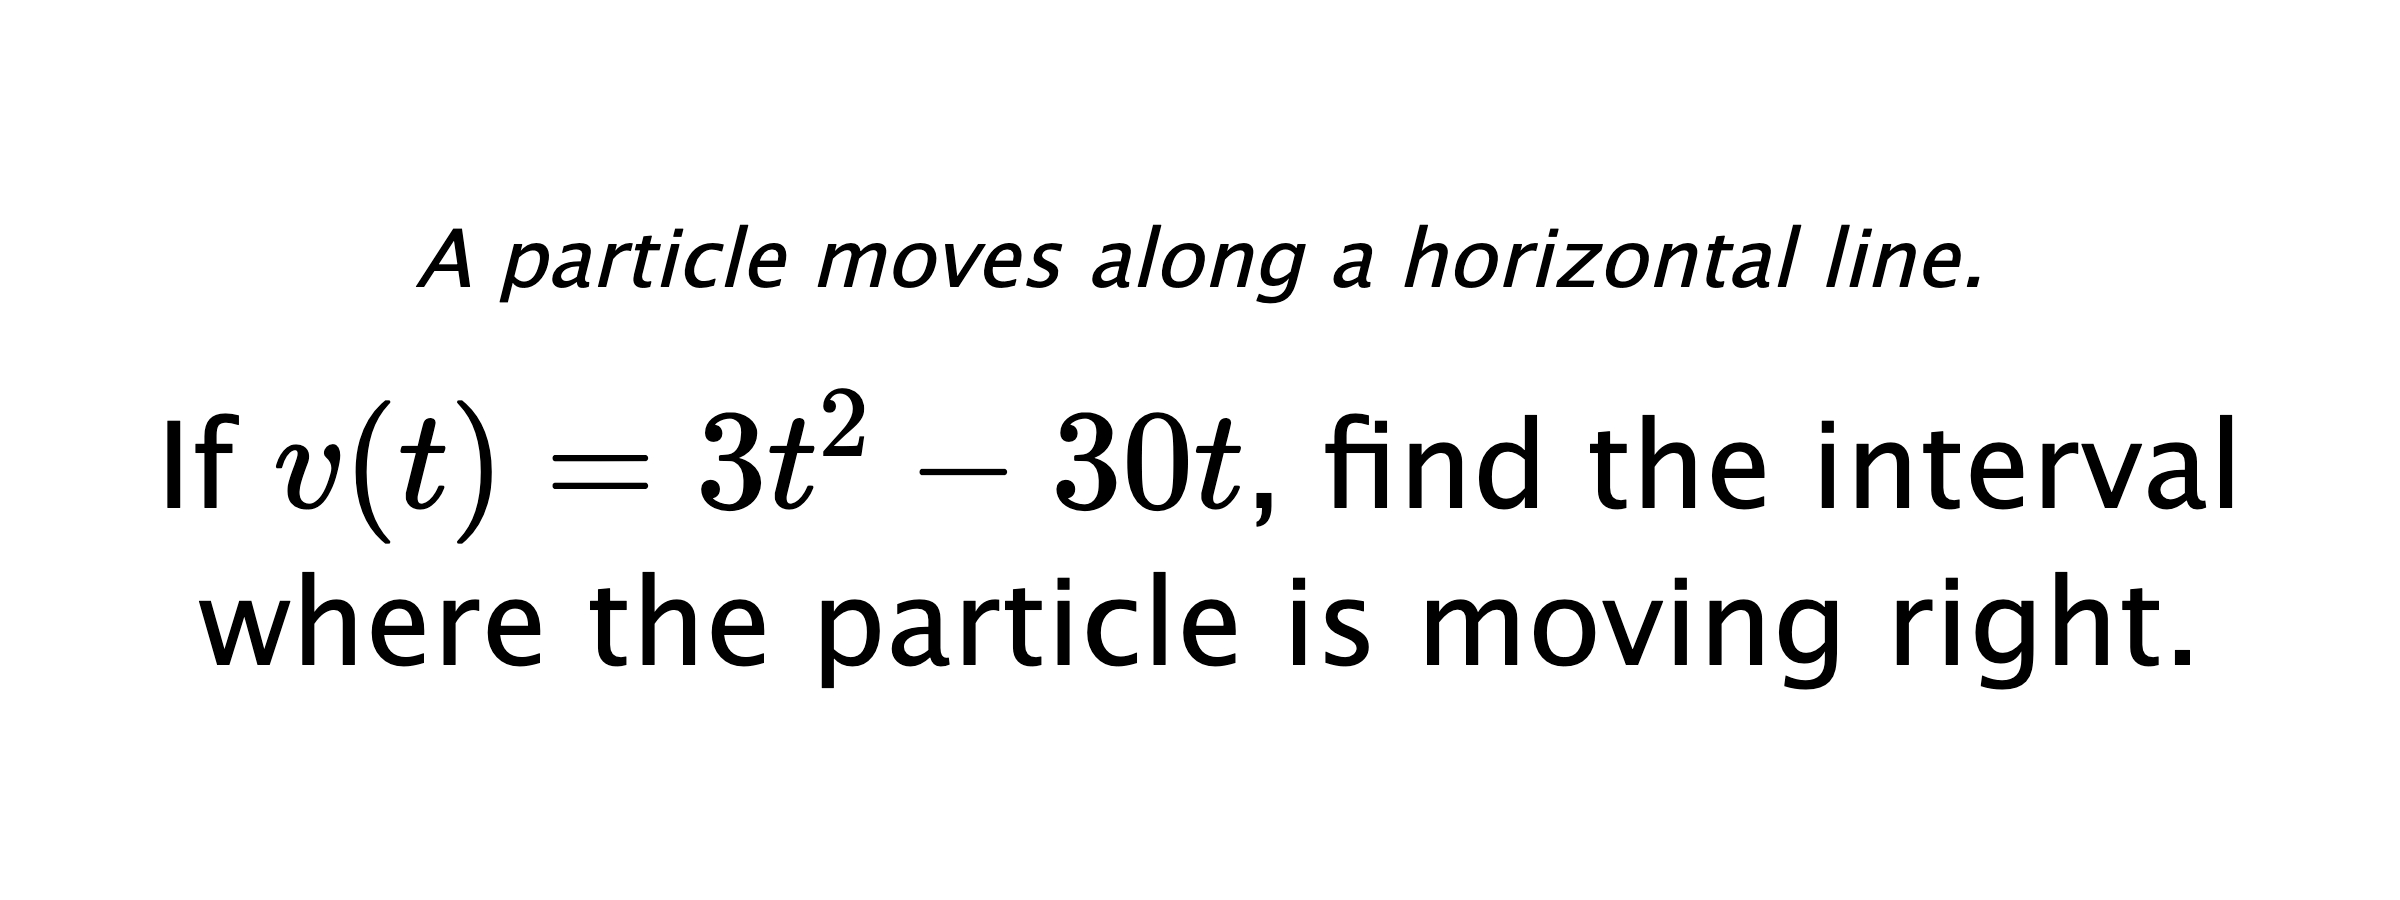 A particle moves along a horizontal line. If $ v(t)=3t^2-30t $, find the interval where the particle is moving right.